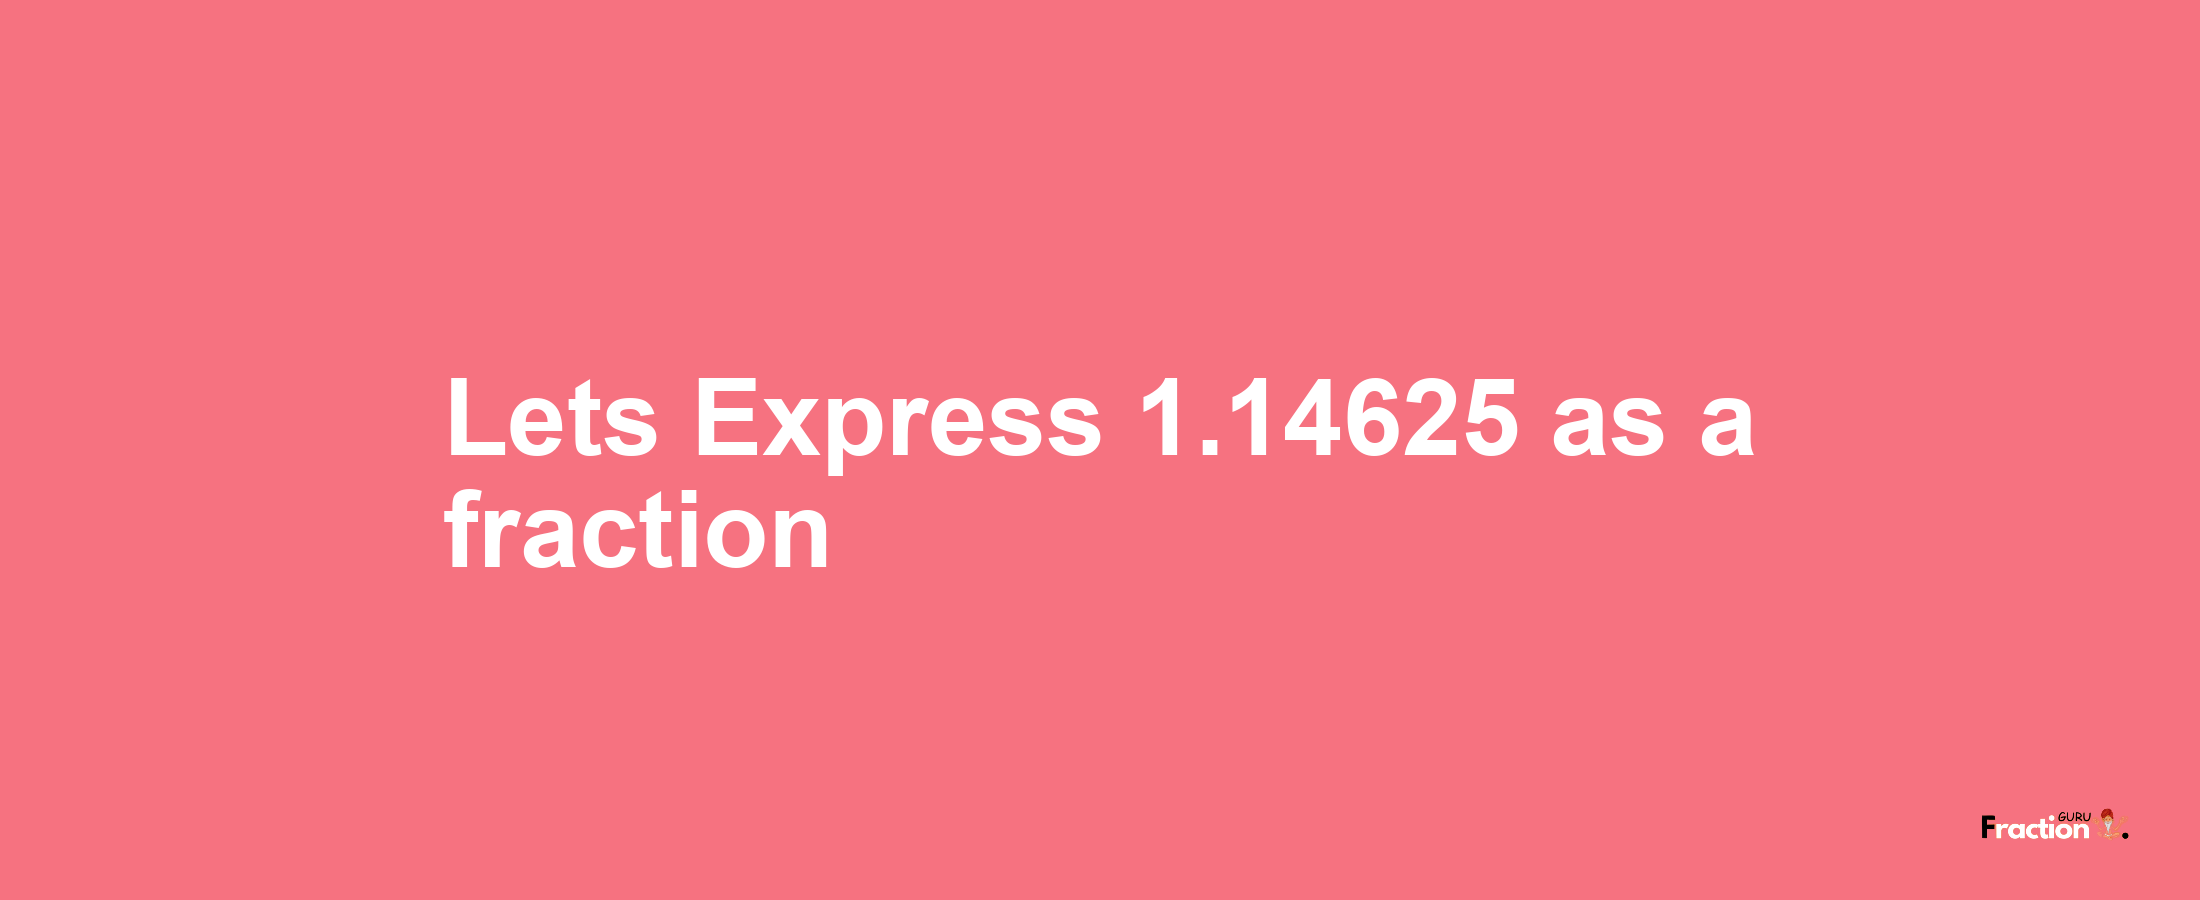 Lets Express 1.14625 as afraction